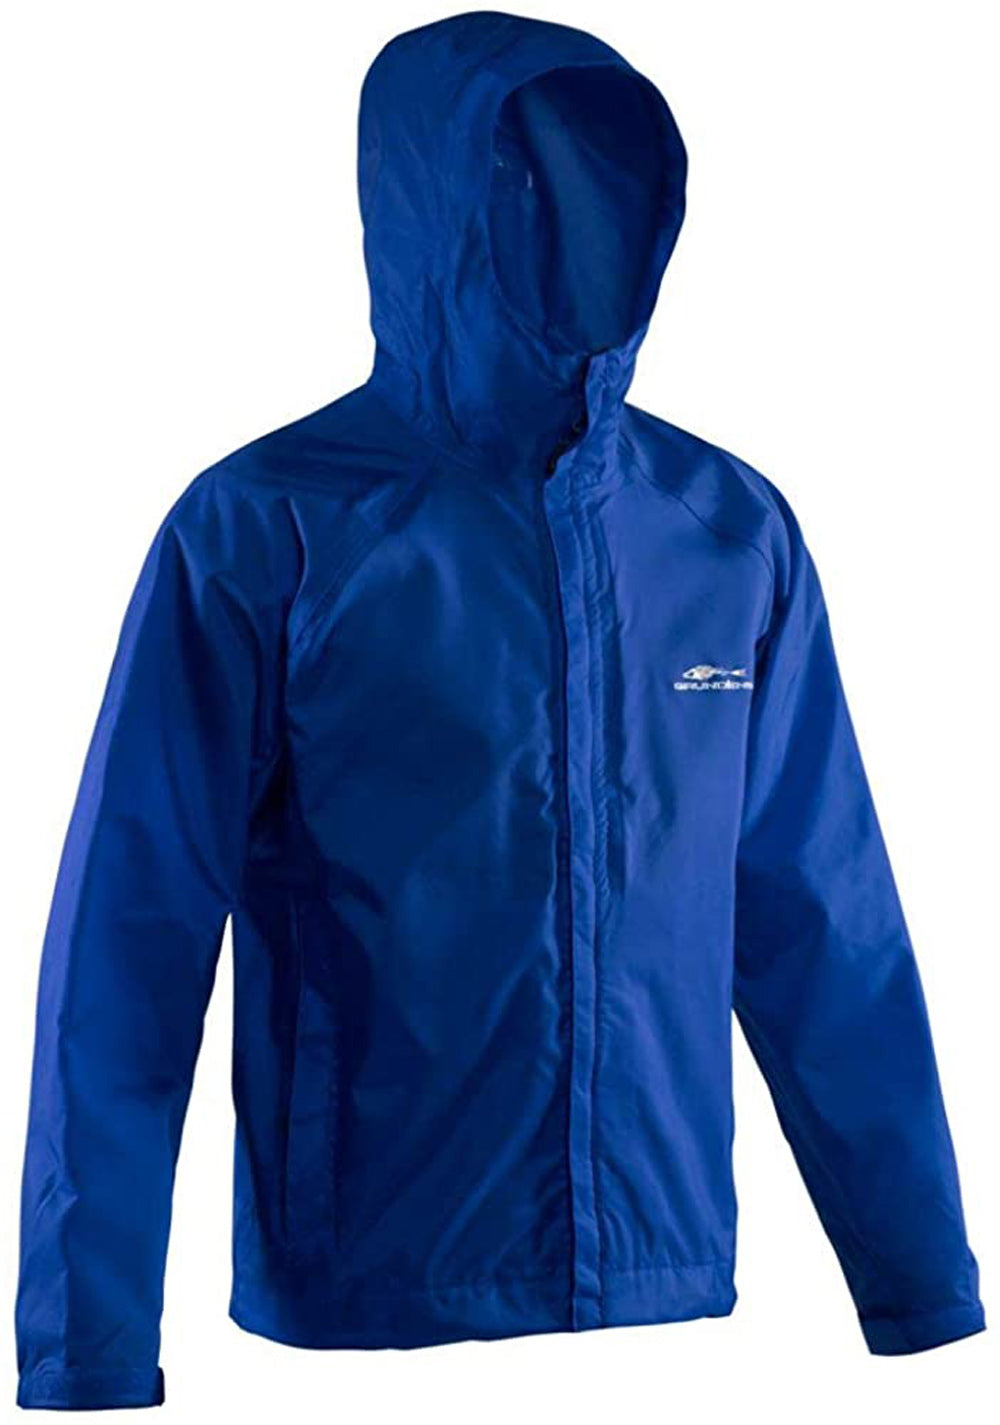 Weather Watch Jacket in Glacier Blue color from the front view